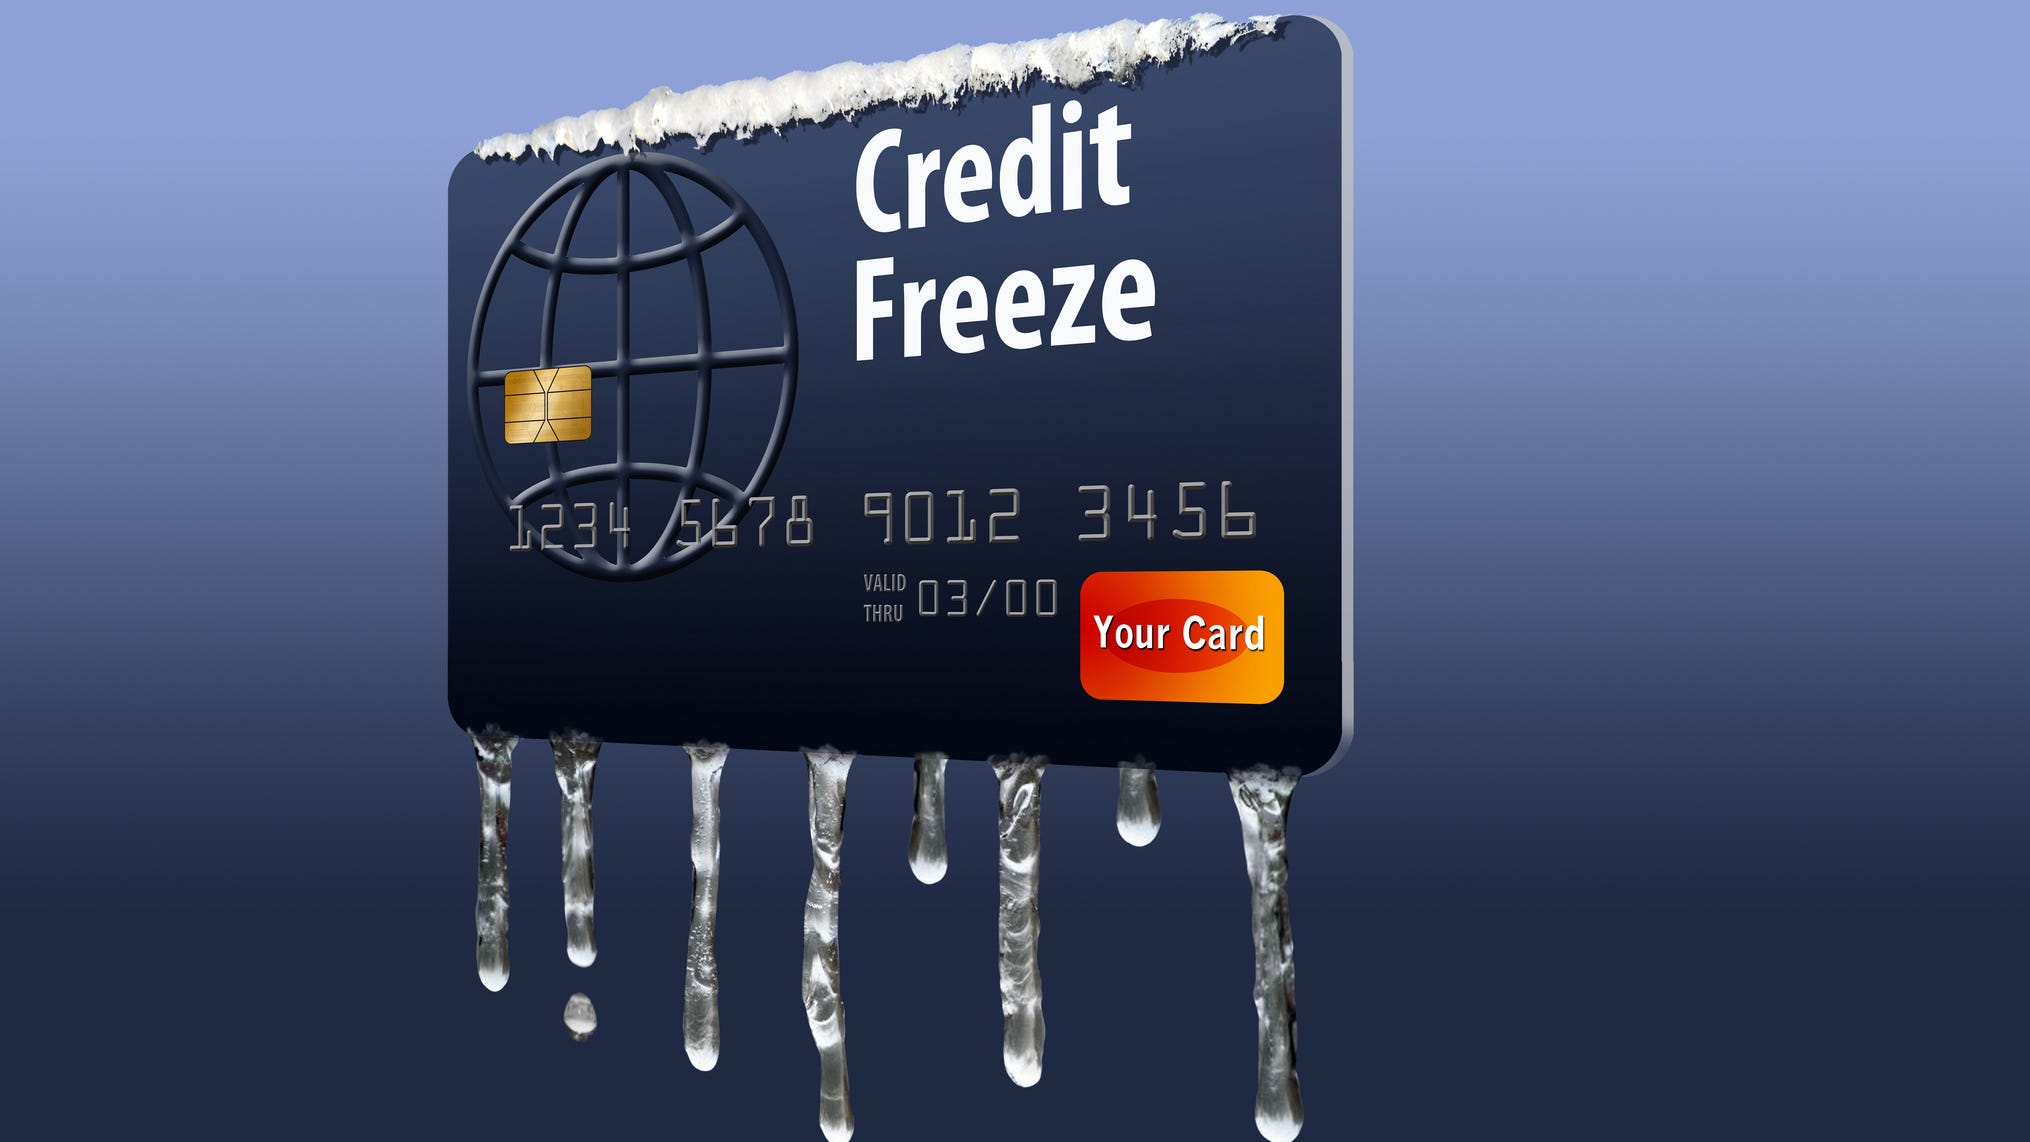 Equifax Breach Credit Freeze Is Free Under New Law